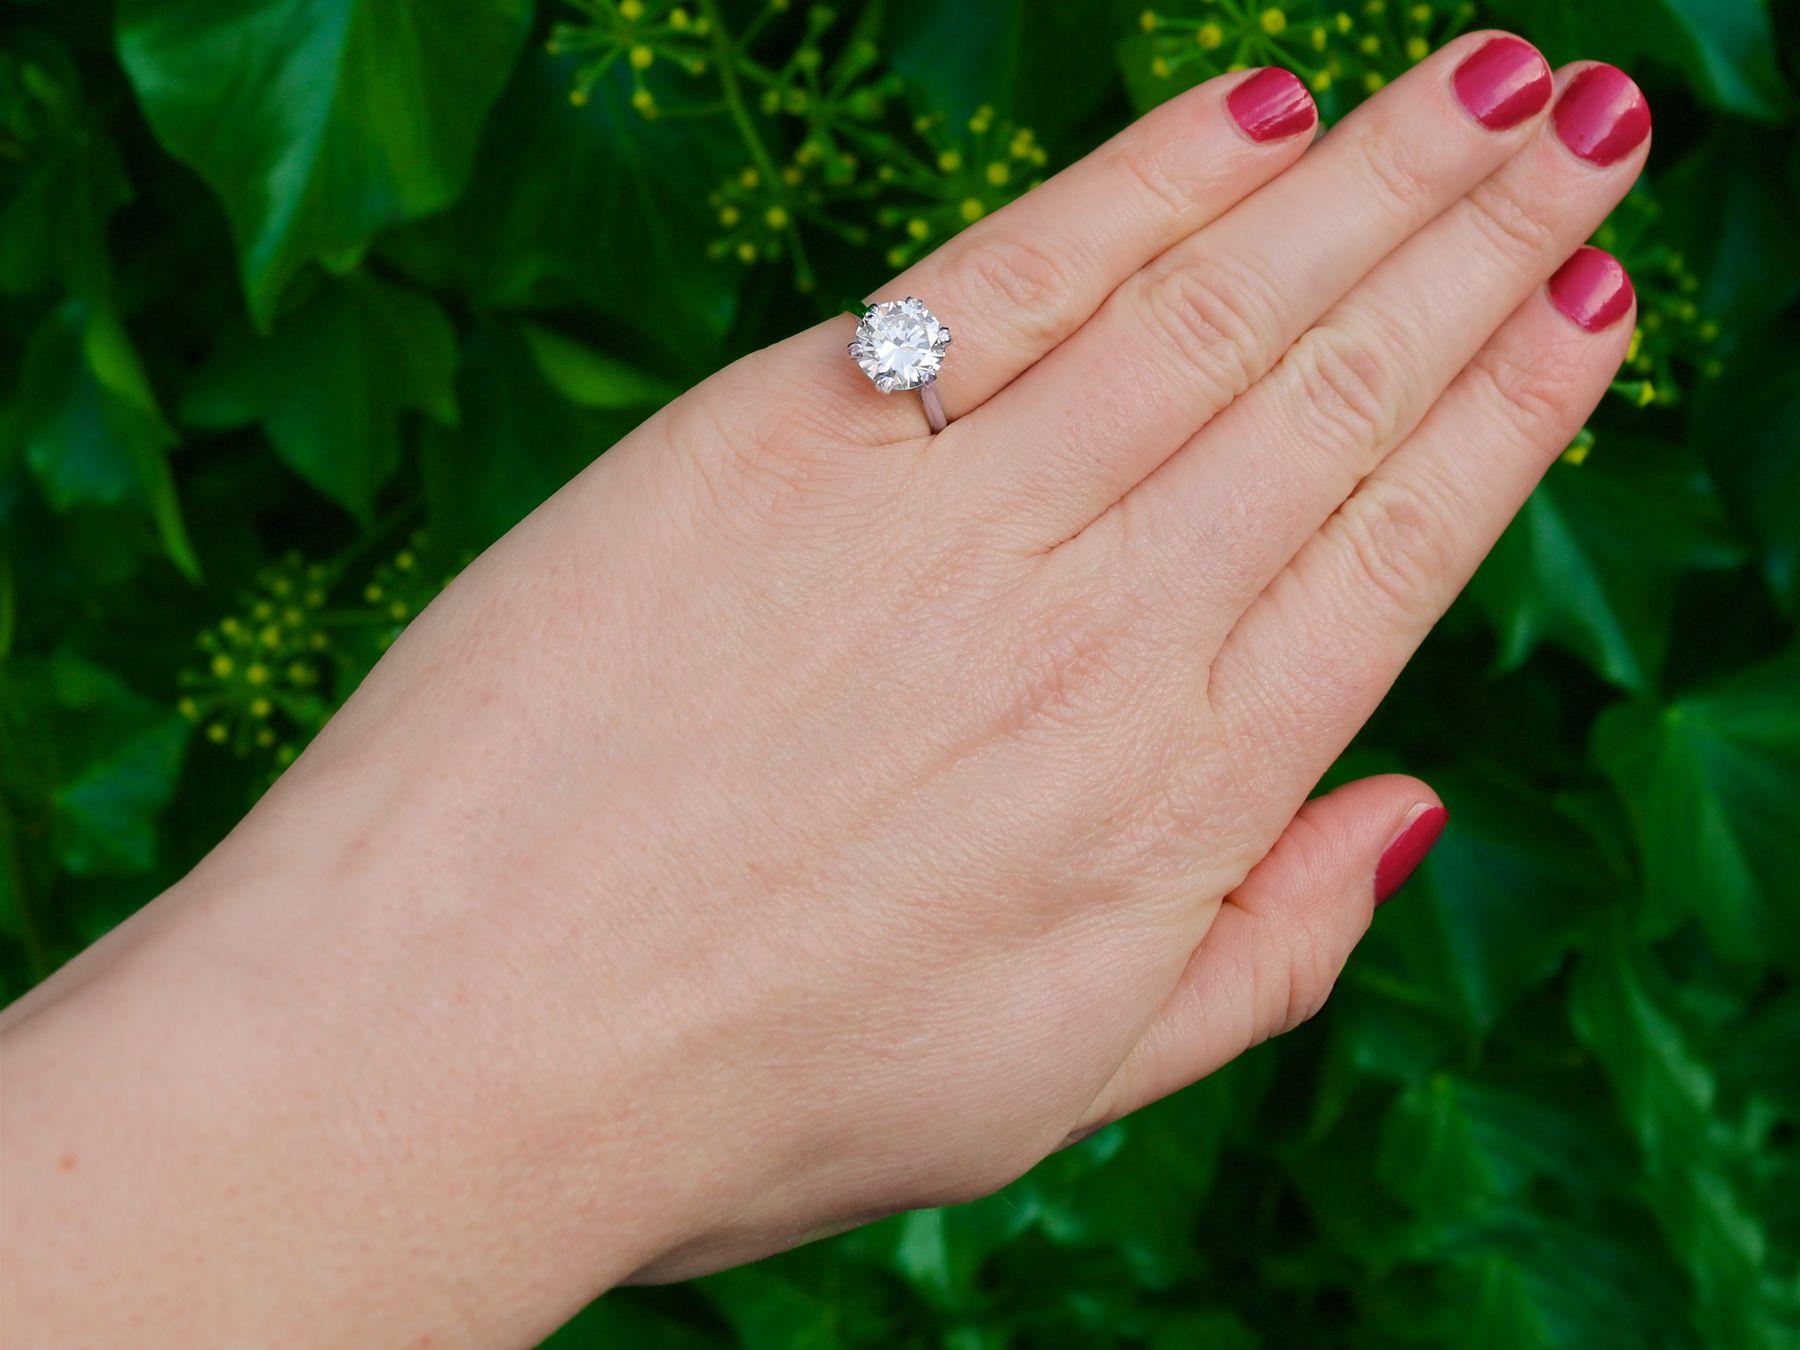 A stunning, fine and impressive vintage 3.03 carat diamond solitaire ring in platinum; part of our vintage engagement ring collections.

This stunning vintage solitaire ring has been crafted in platinum.

The ring displays a 3.03 carat transitional